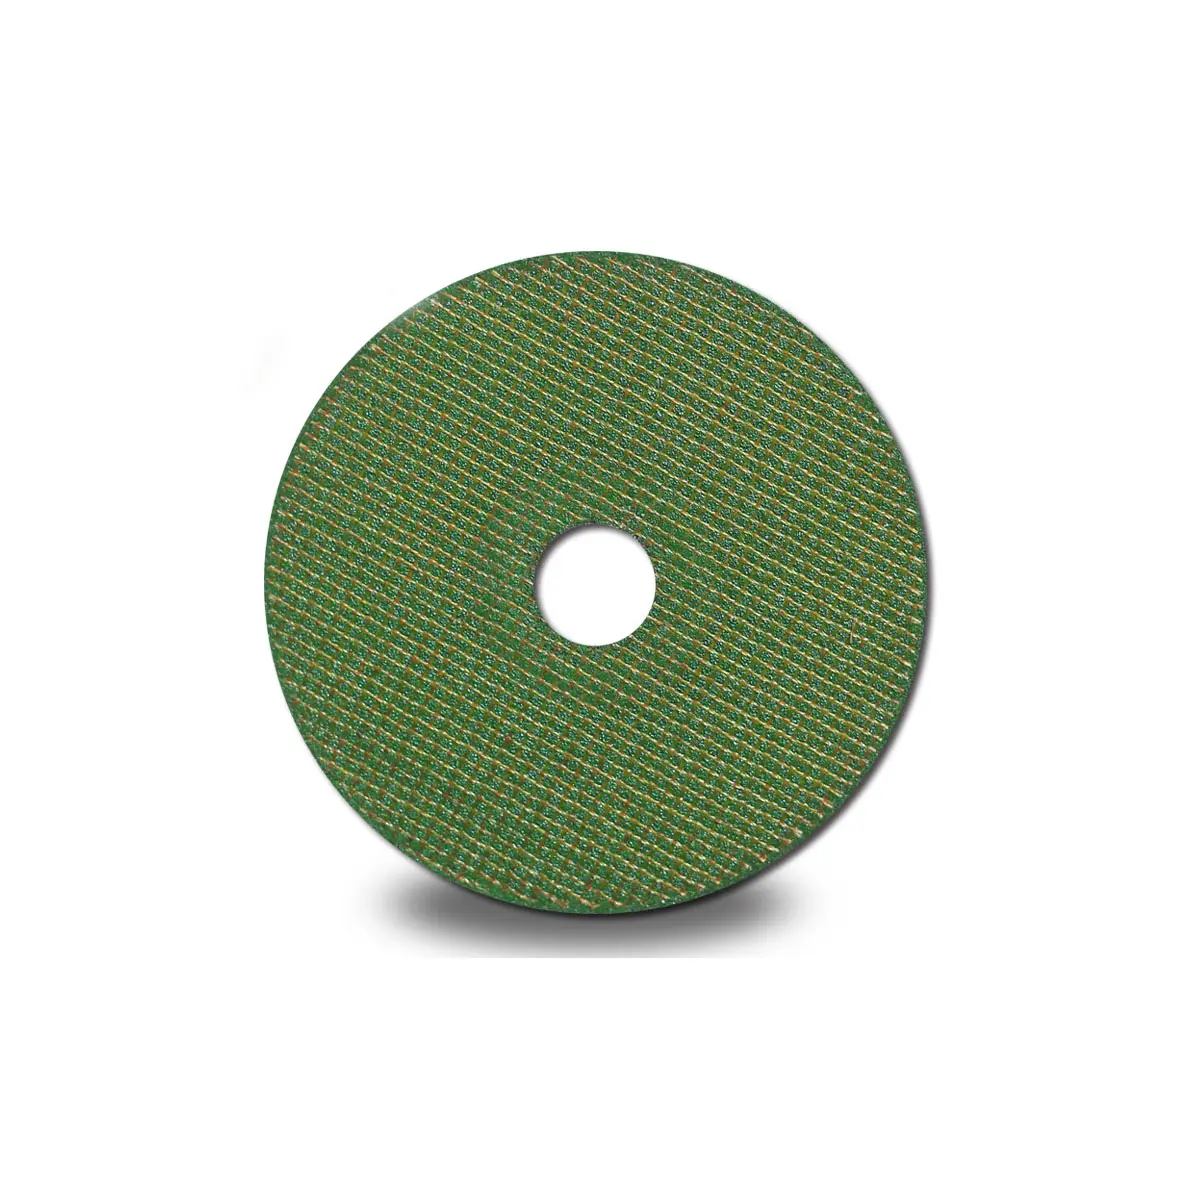 4 Inch Grinding Diamond Abrasive Polishing Disc Cut Off Wheel for Metal and Stainless Steel